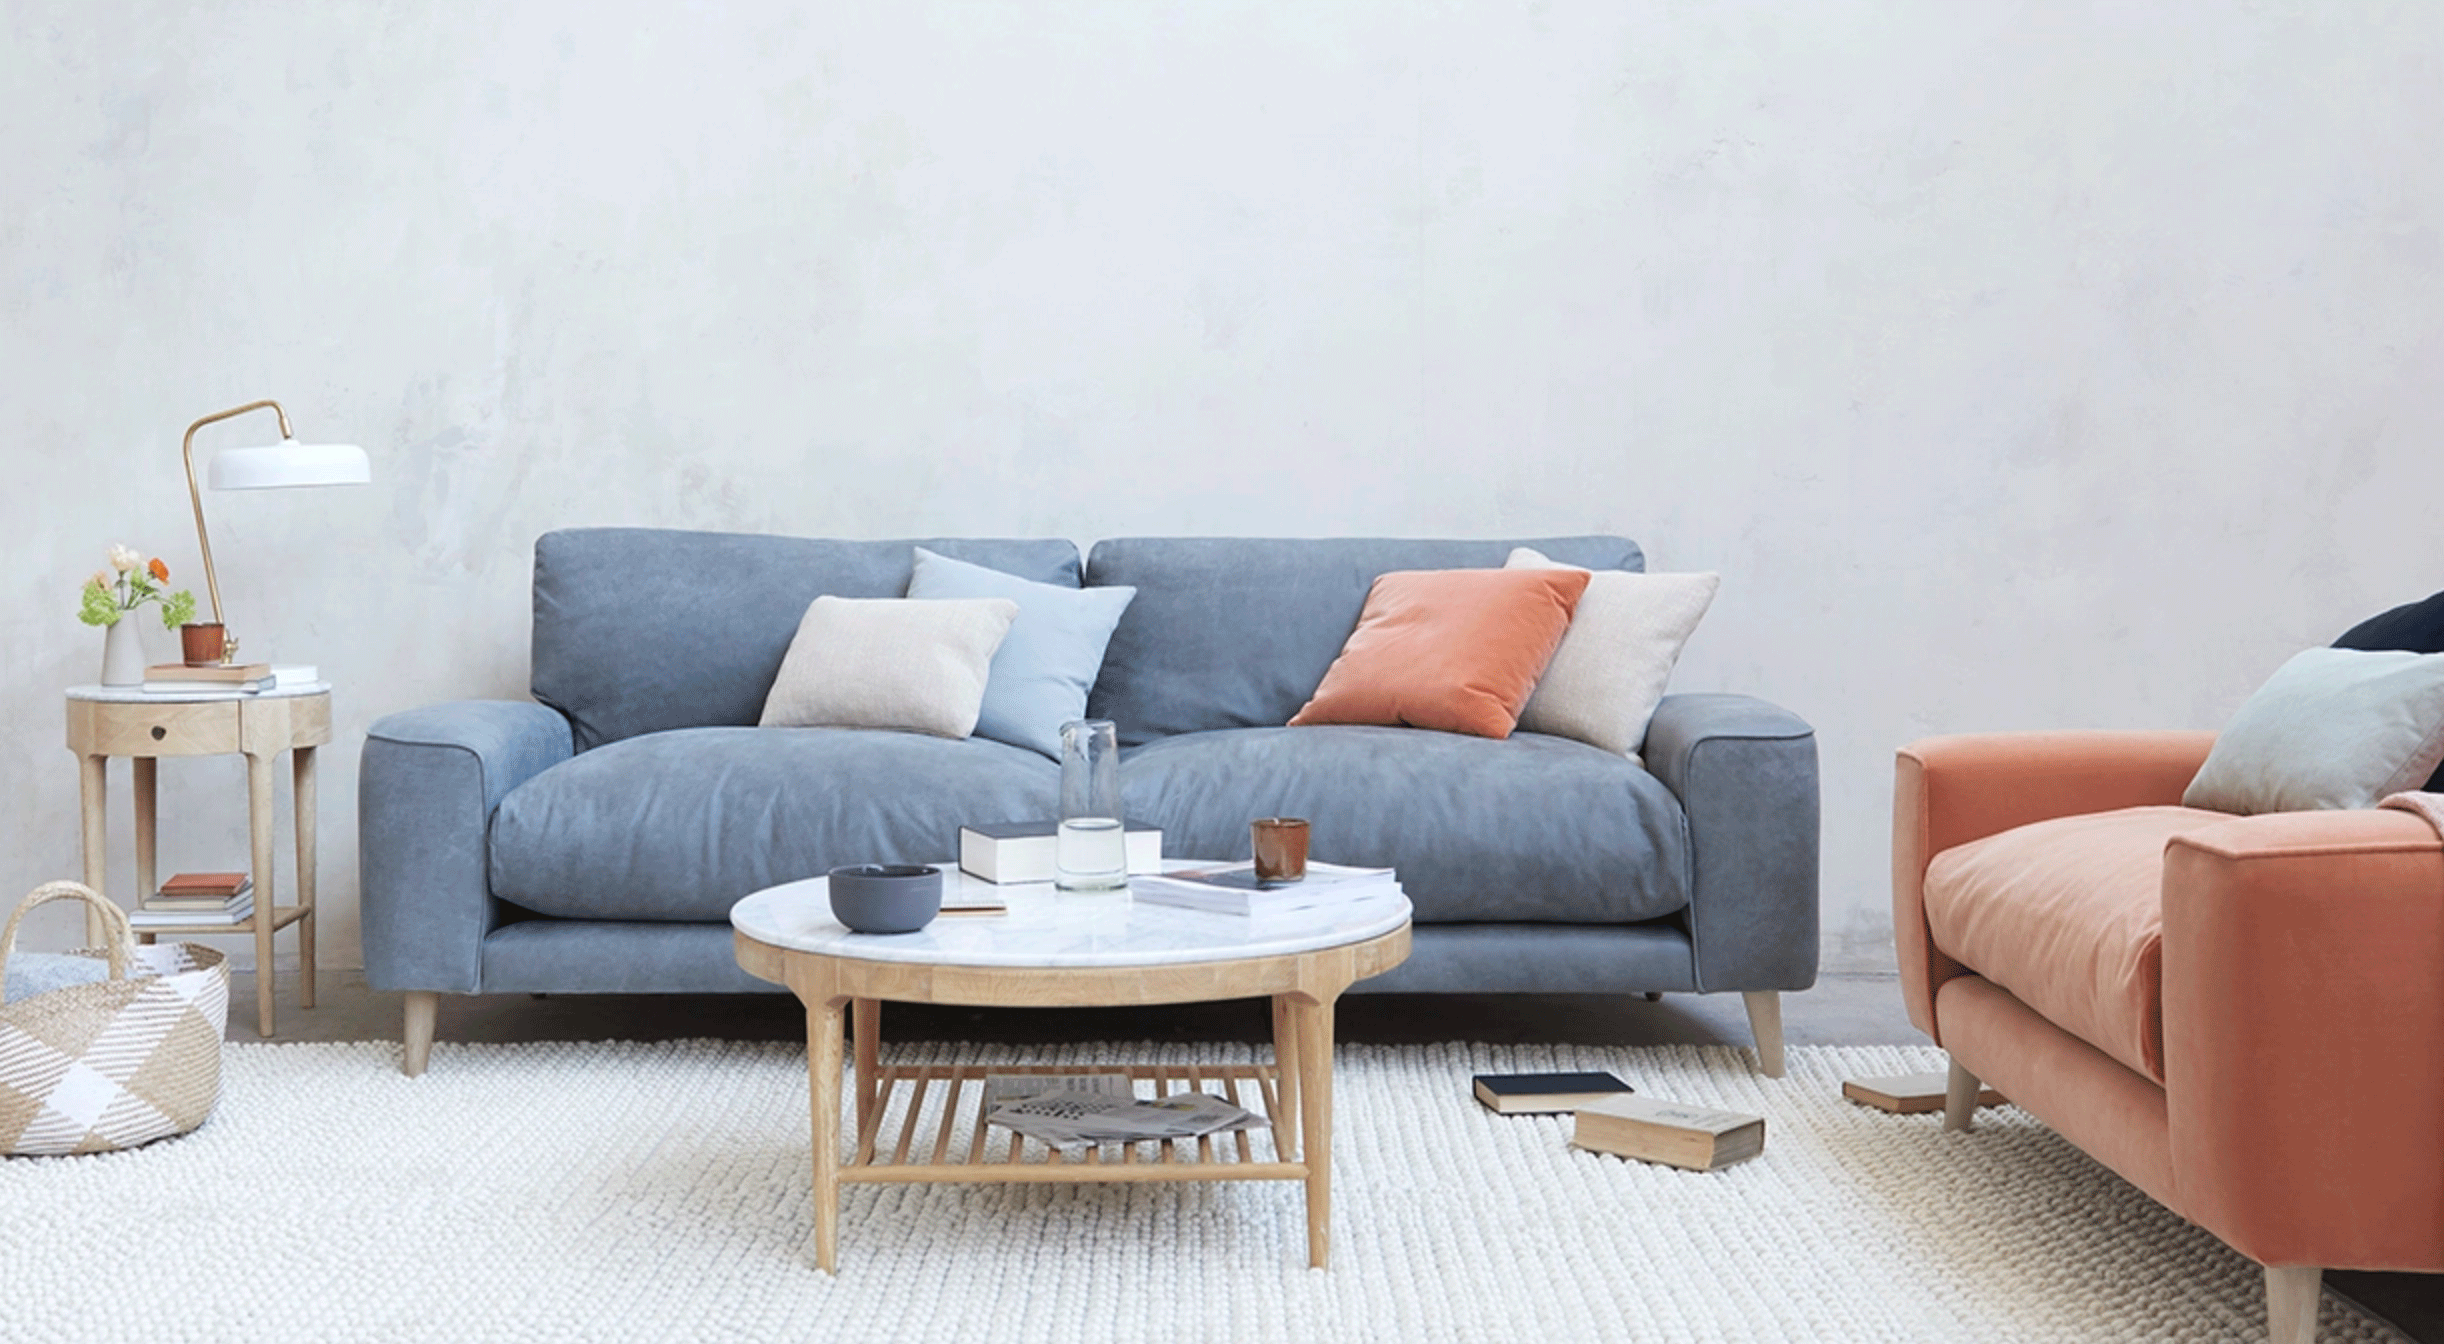 The best sofa brands: 12 top places to shop for a new sofa | Real Homes